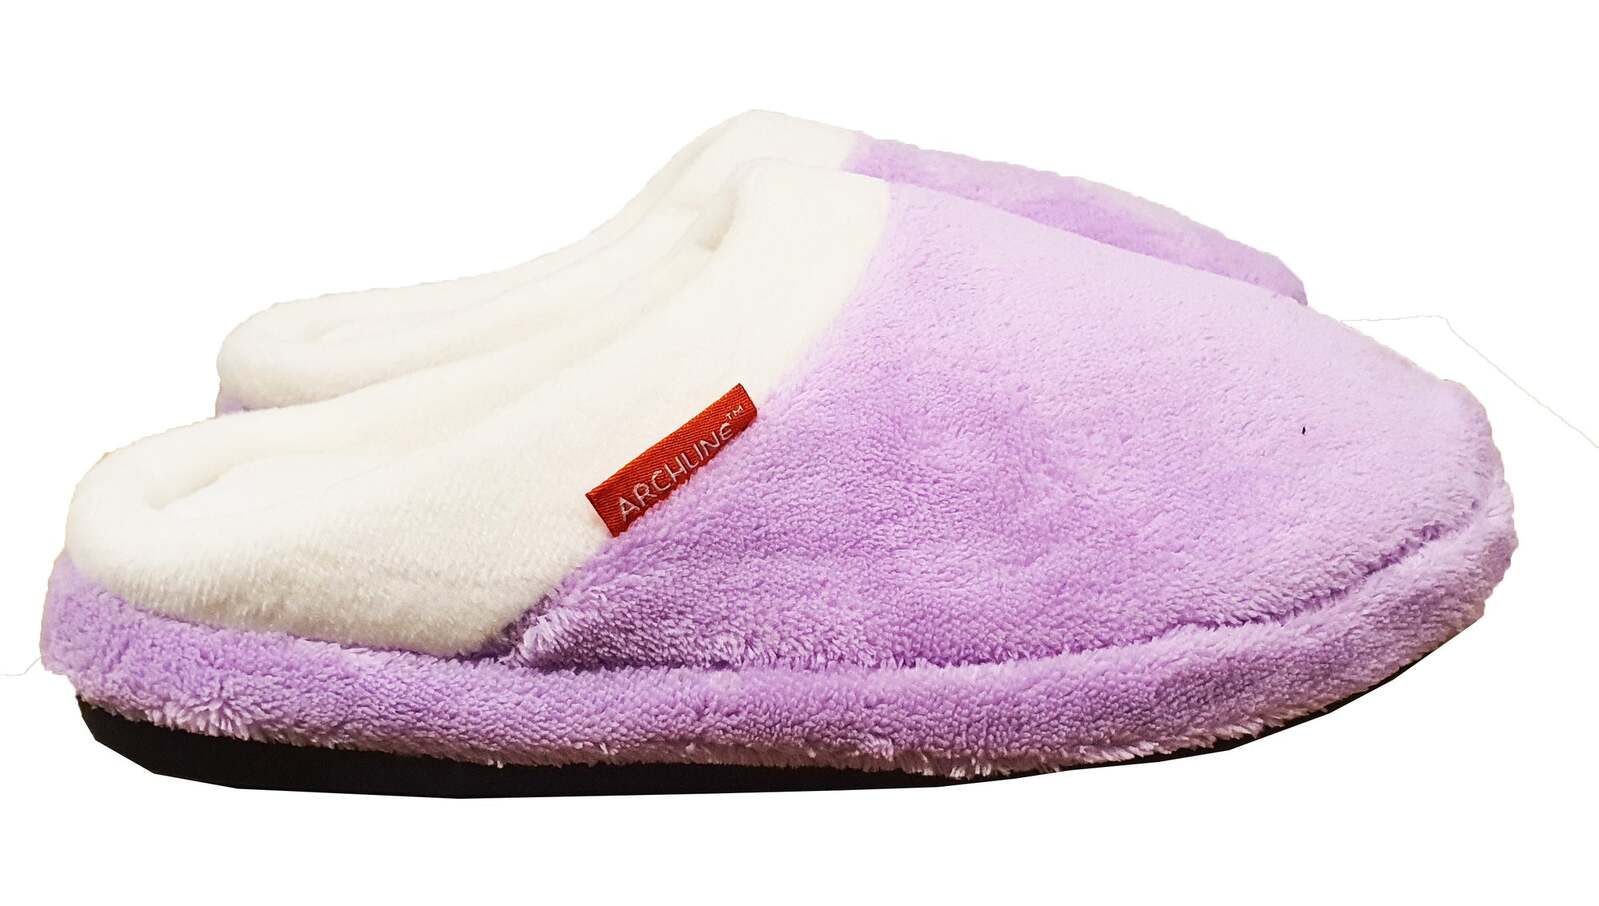 ARCHLINE Orthotic Slippers Slip On Arch Scuffs Pain Relief Moccasins - Lilac - EU 43